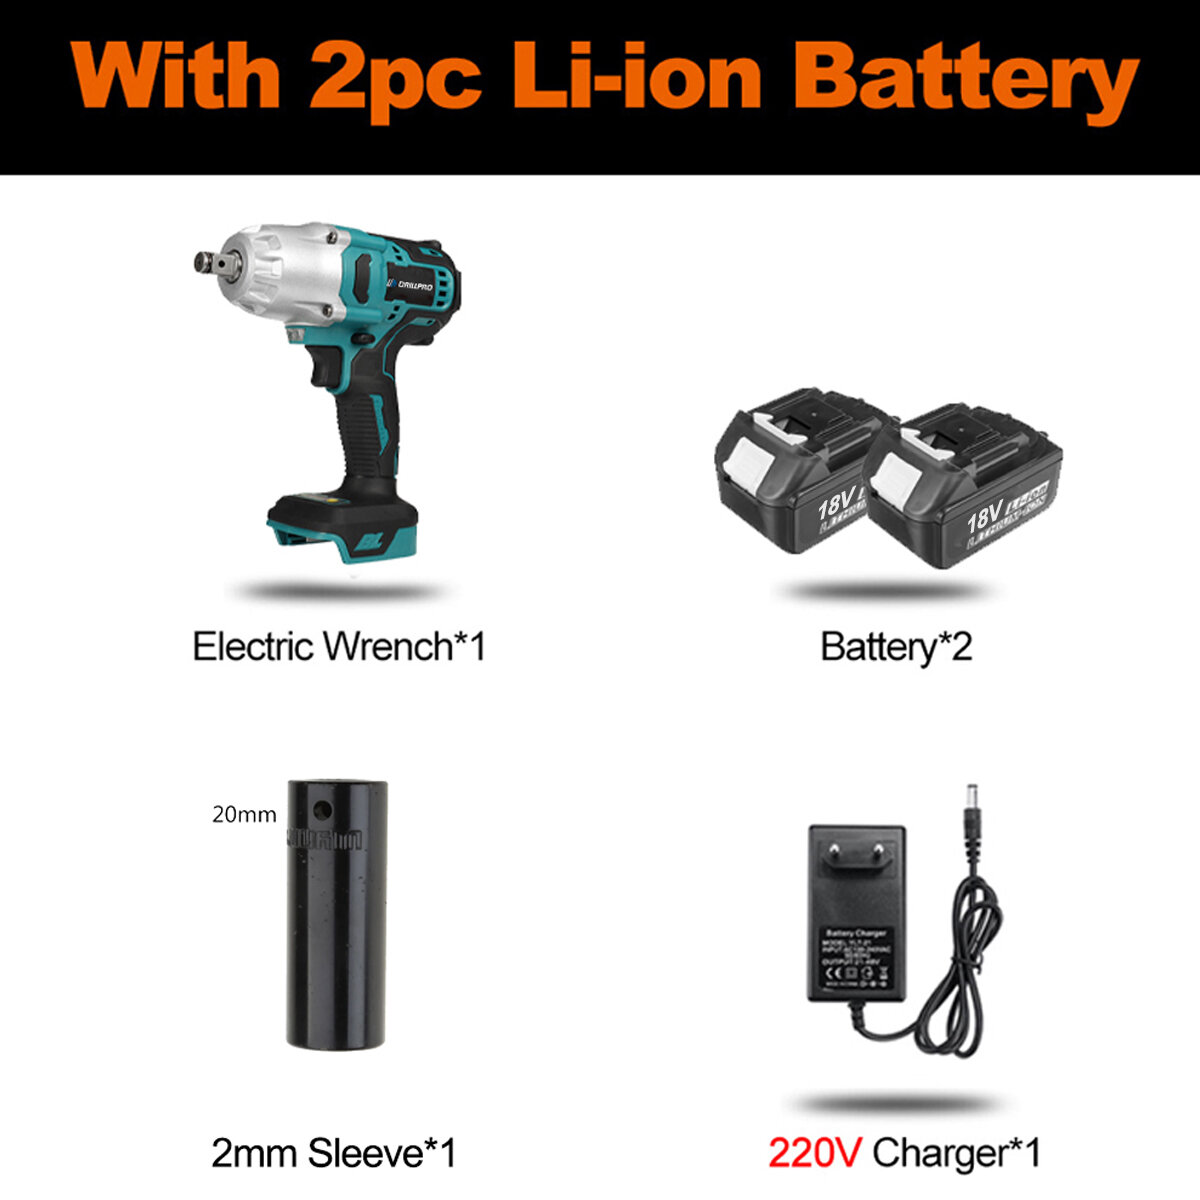 best price,drillpro,18v,brushless,electric,wrench,rpm,800nm,with,batteries,eu,discount